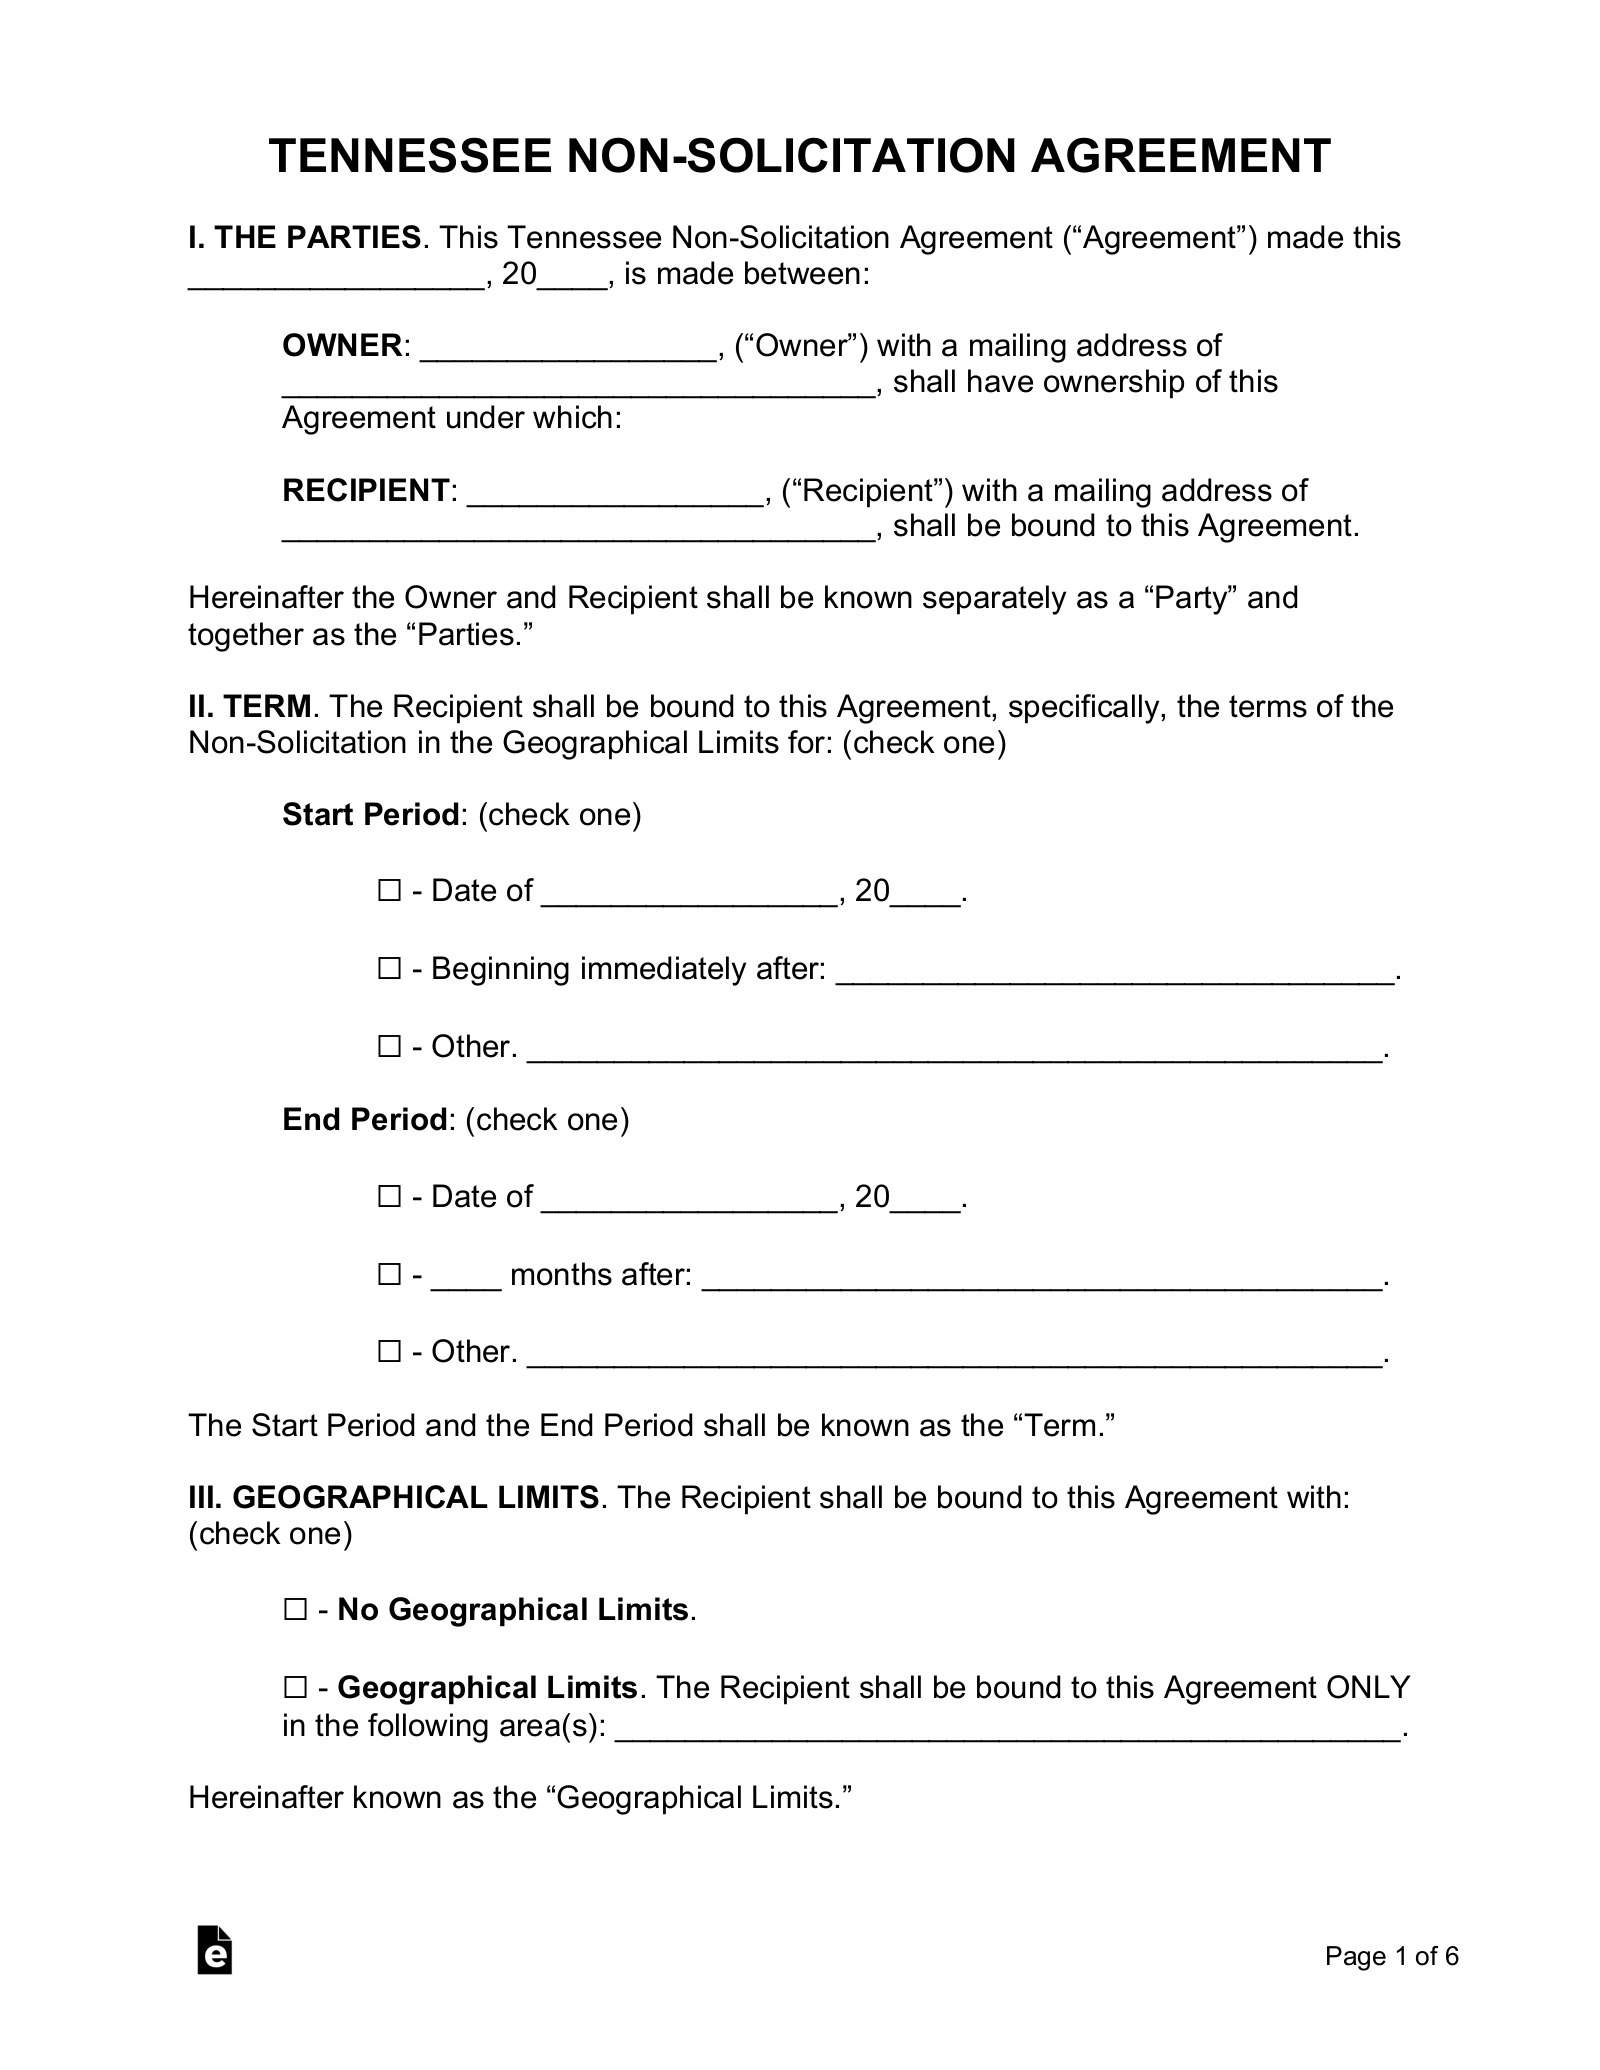 Tennessee Non-Solicitation Agreement